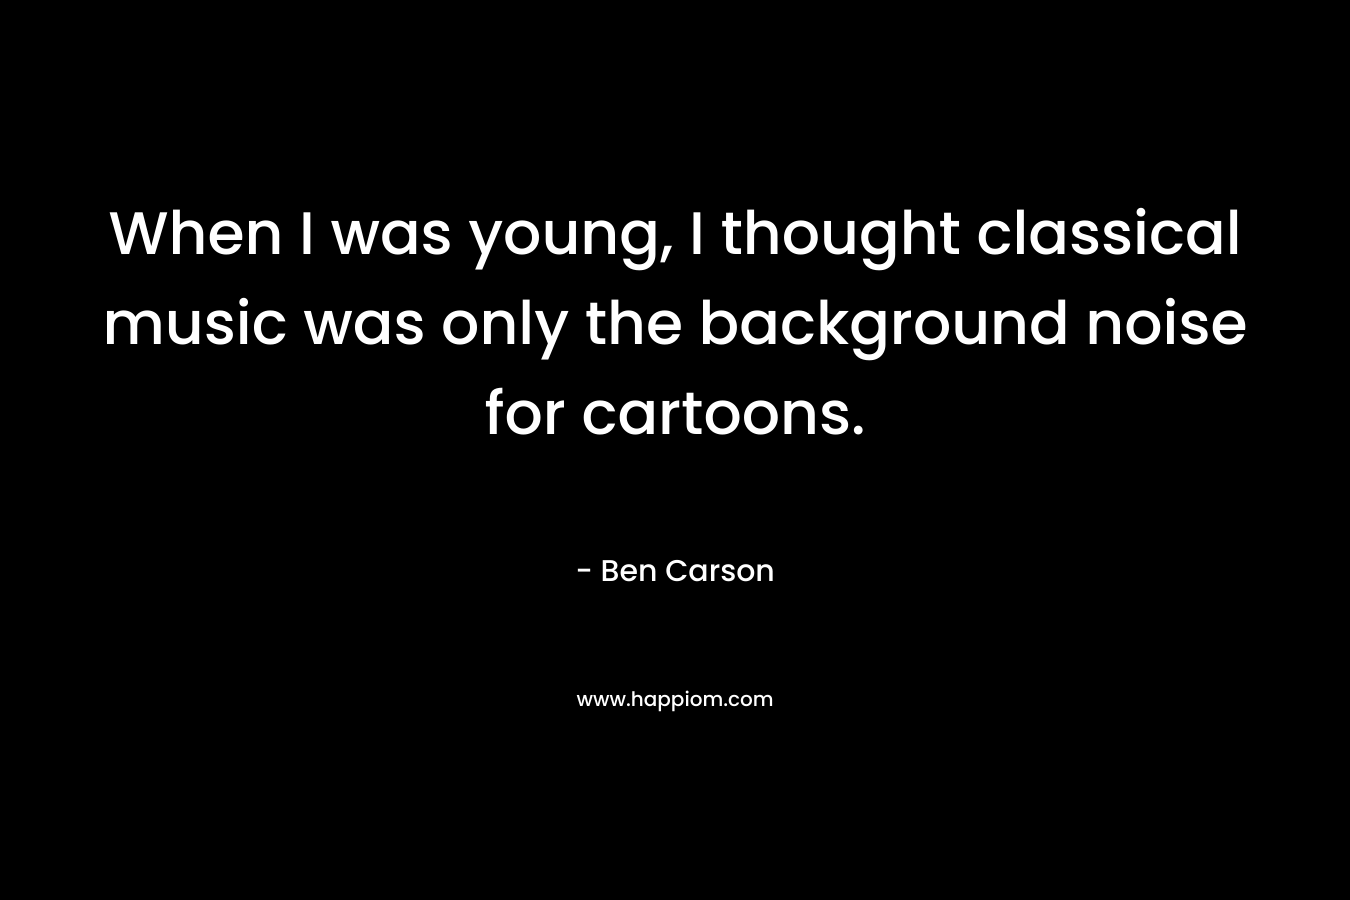 When I was young, I thought classical music was only the background noise for cartoons. – Ben Carson